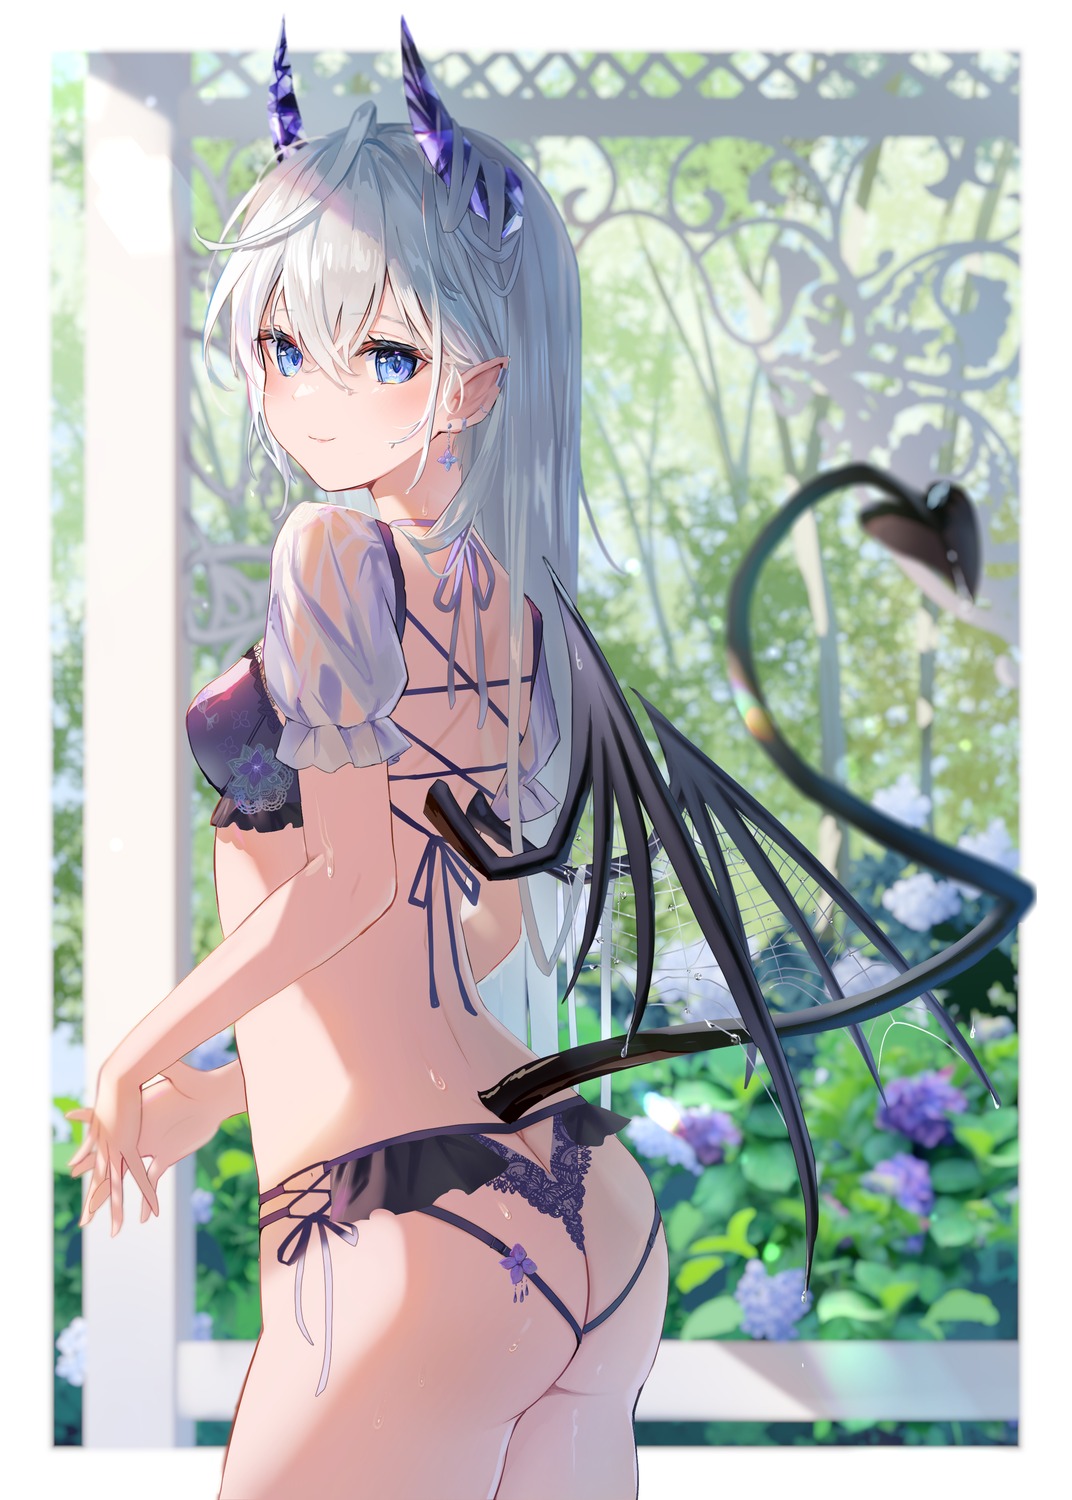 ass bra devil horns omelet_tomato pantsu pointy_ears see_through tail thong wings